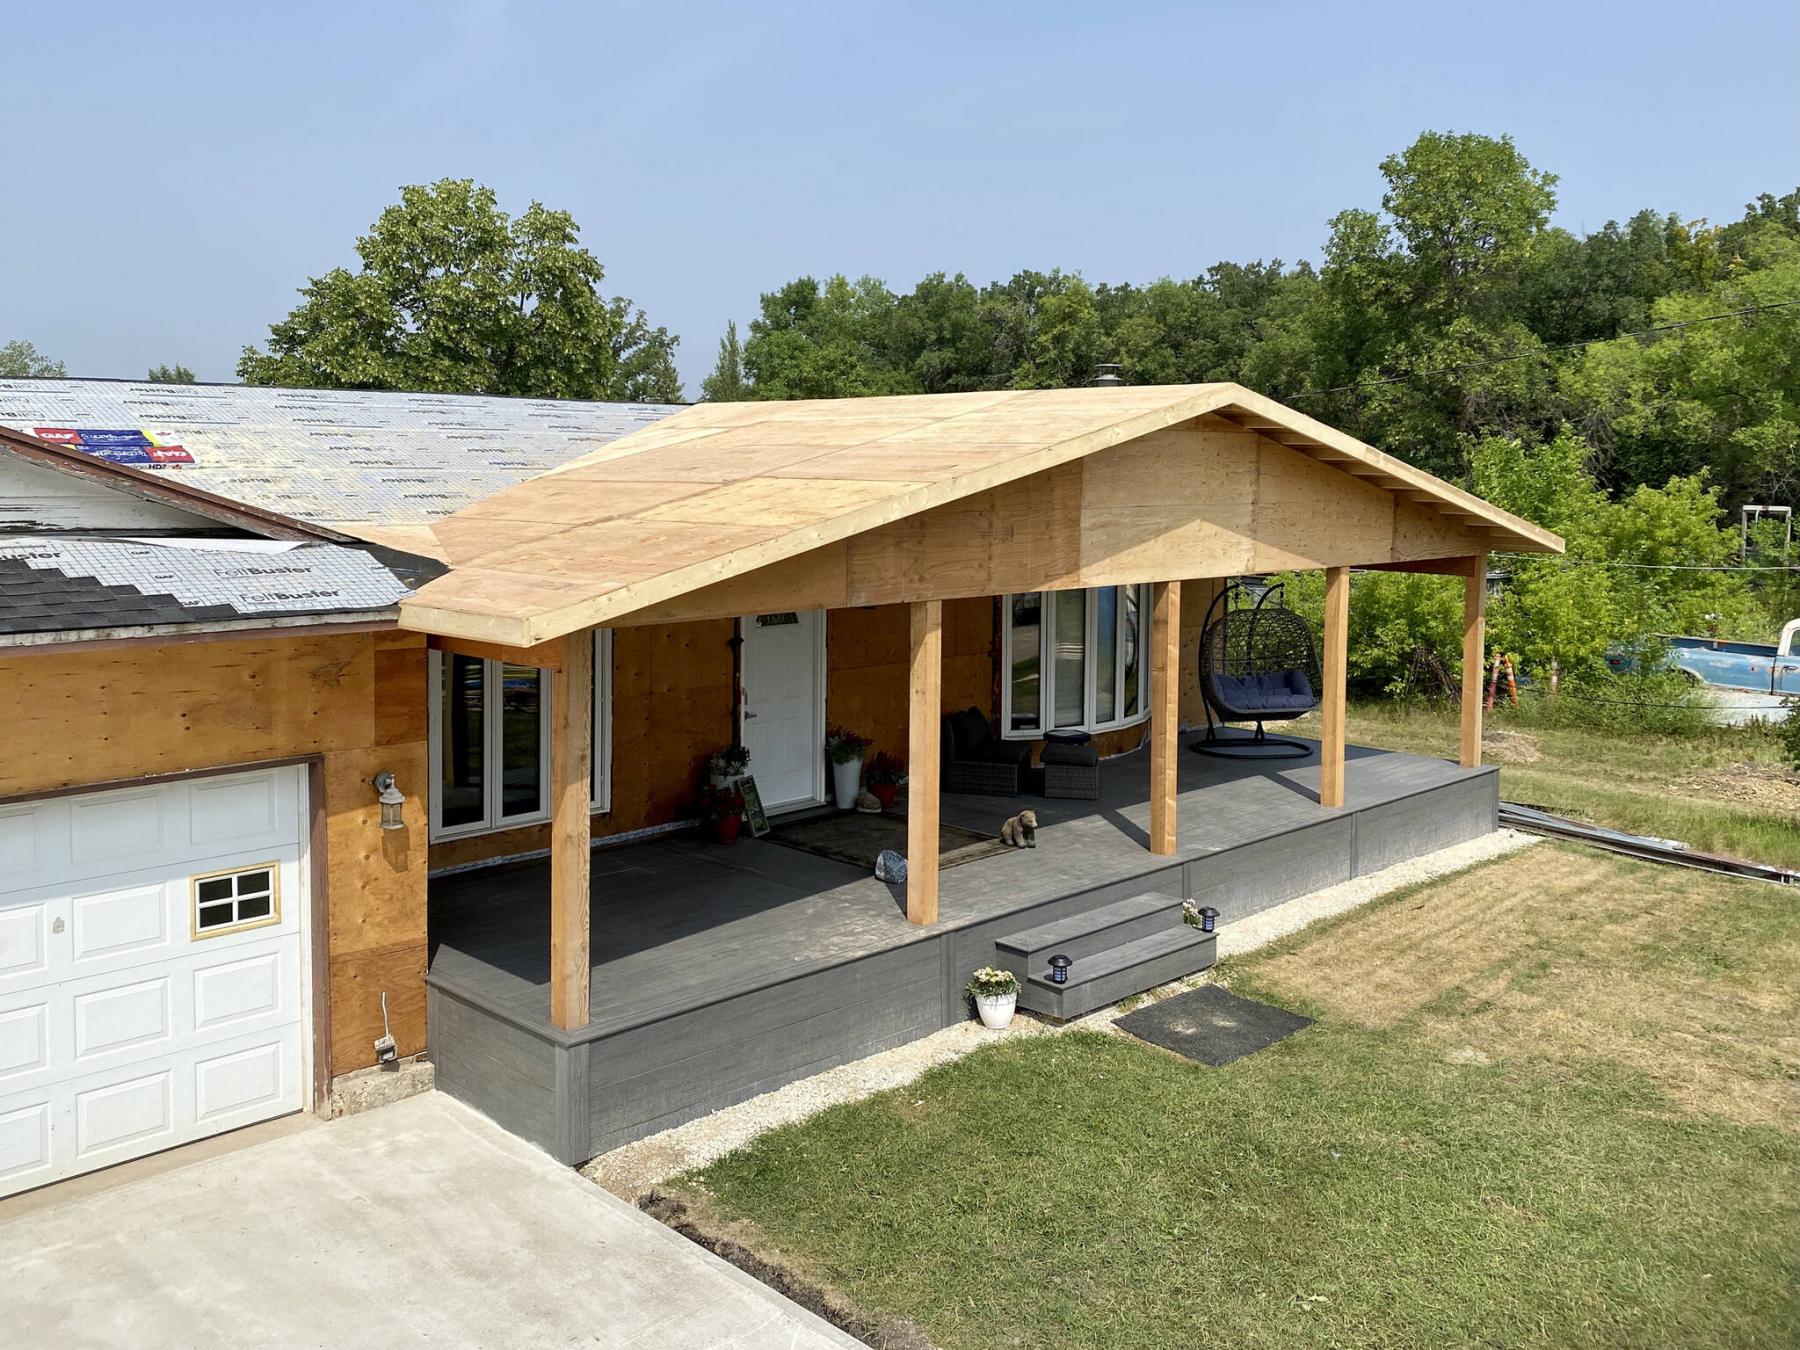 <p>Marc LaBossiere / Winnipeg Free Press</p><p>An engineered porch and new roofline is built from architectural drawings based on the custom design.</p>